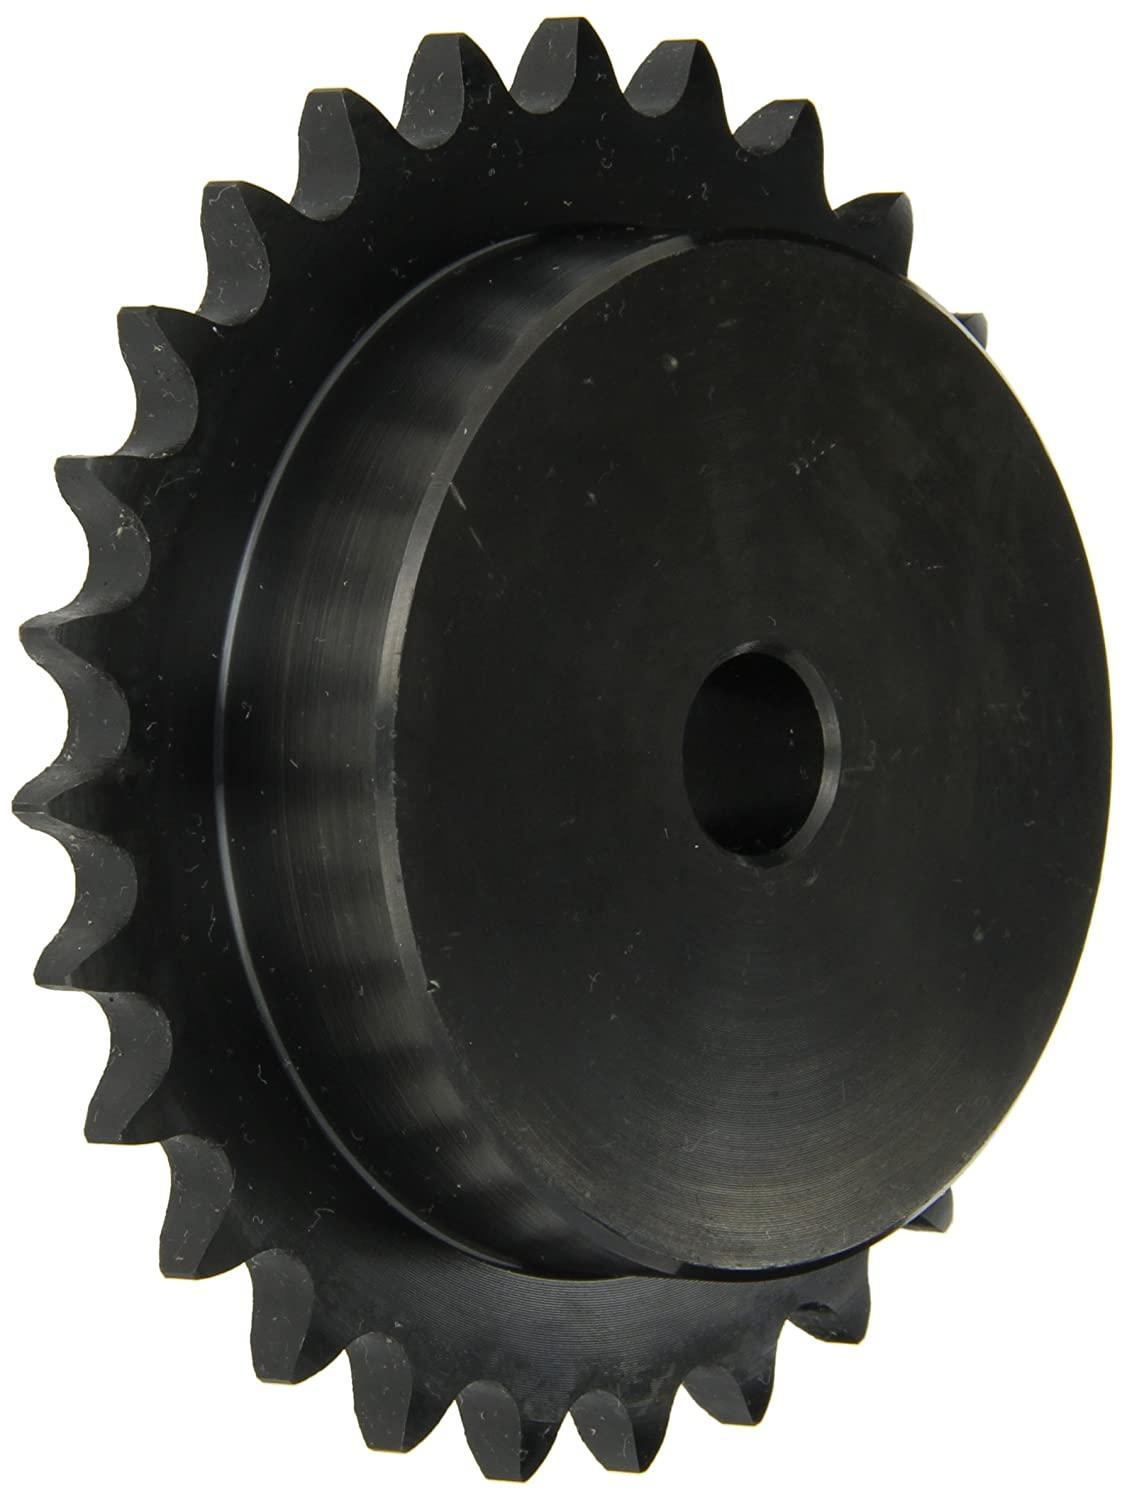 40B20H Roller Chain Sprocket With Stock Bore - Forces Inc